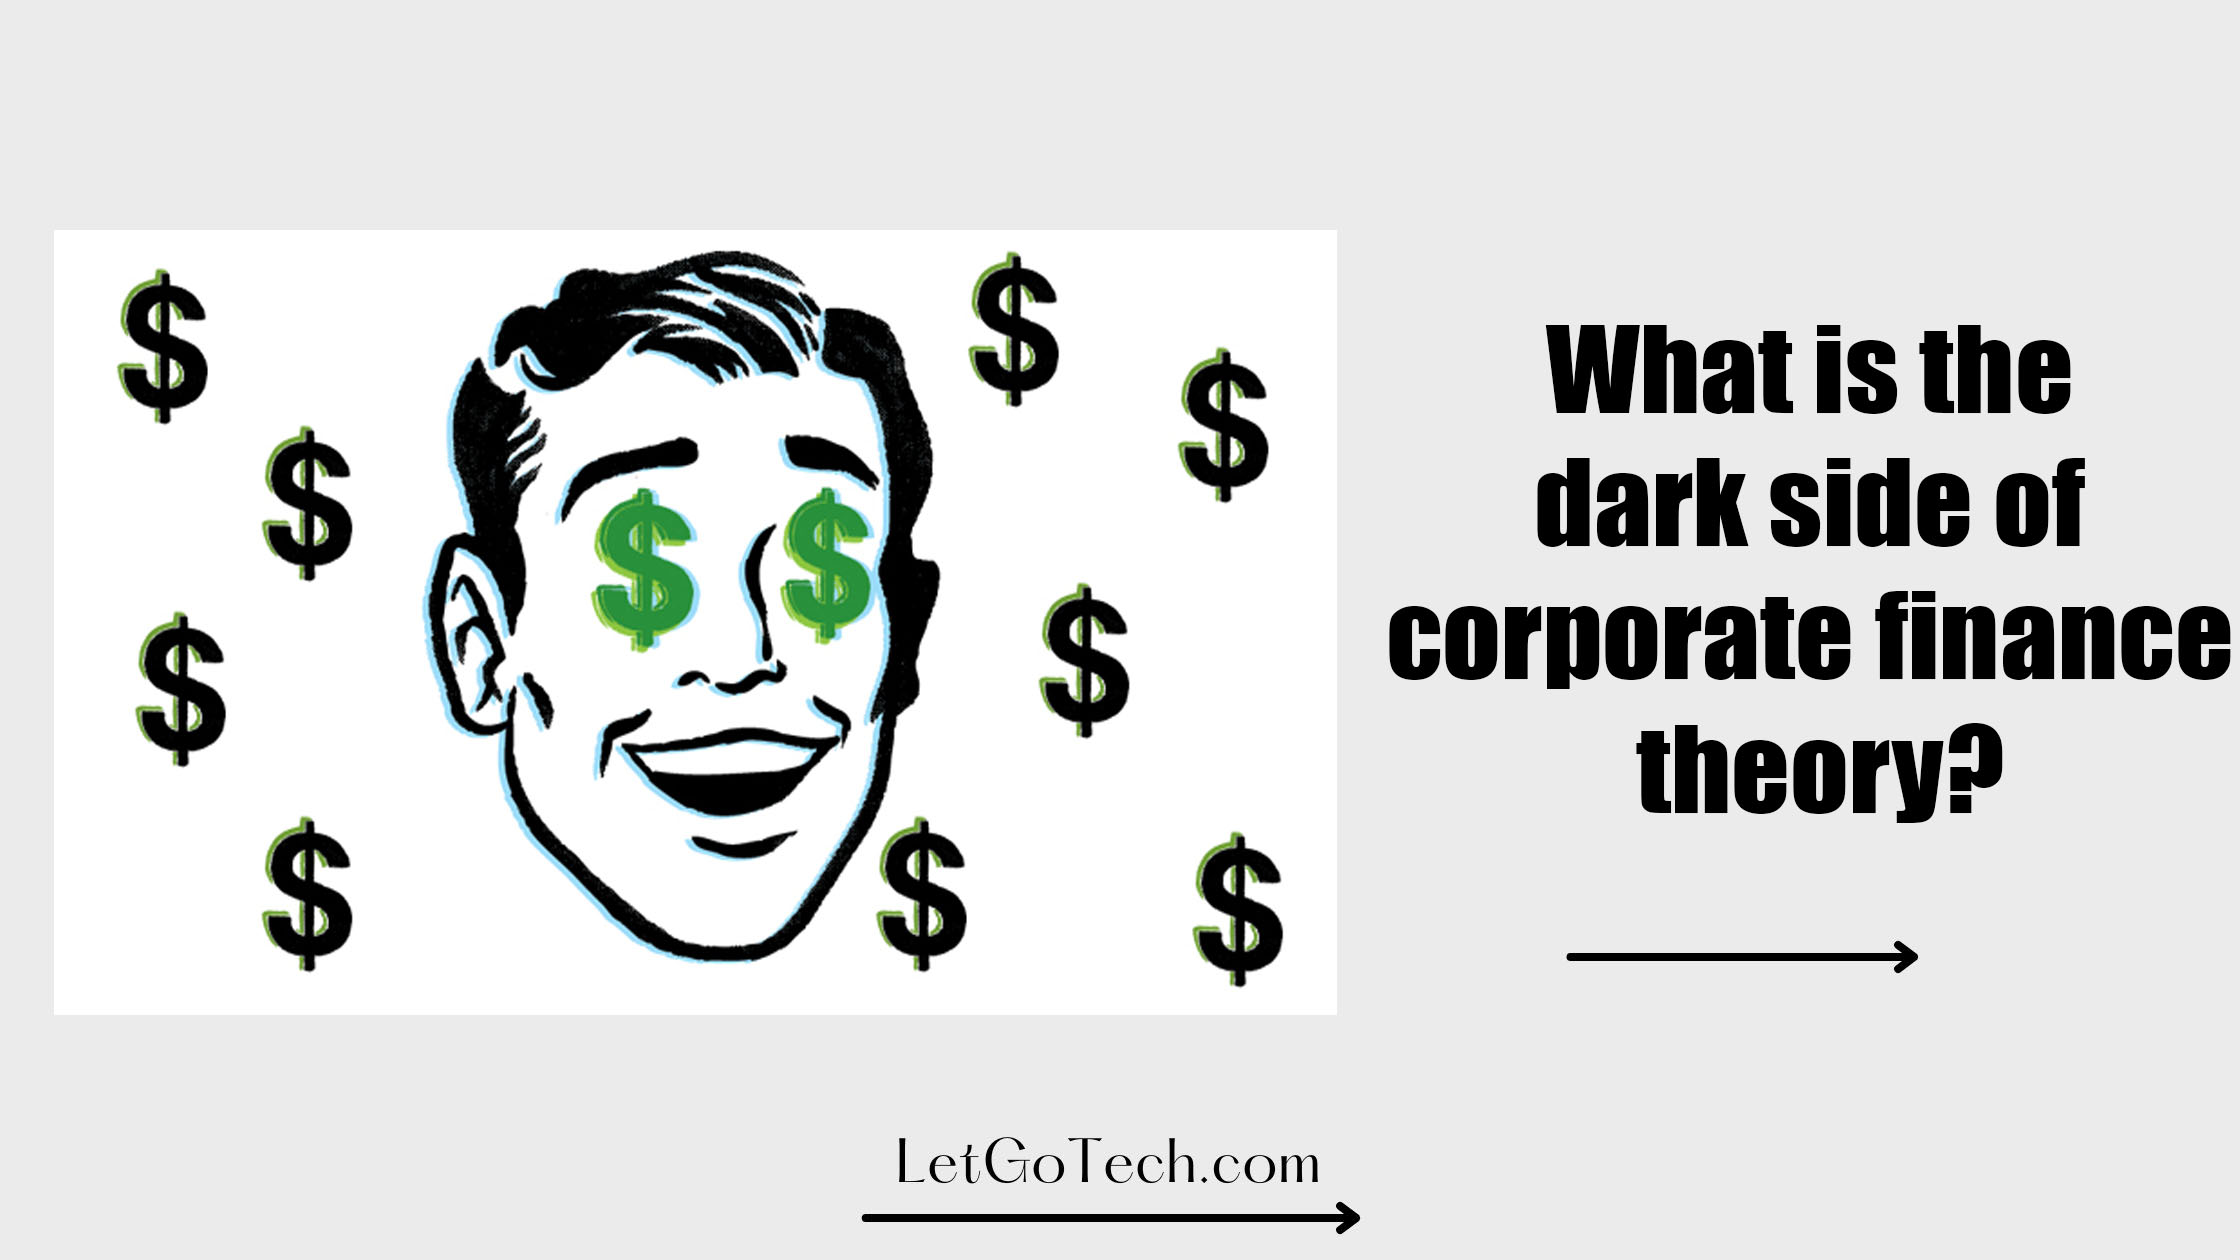 What is the dark side of corporate finance theory?